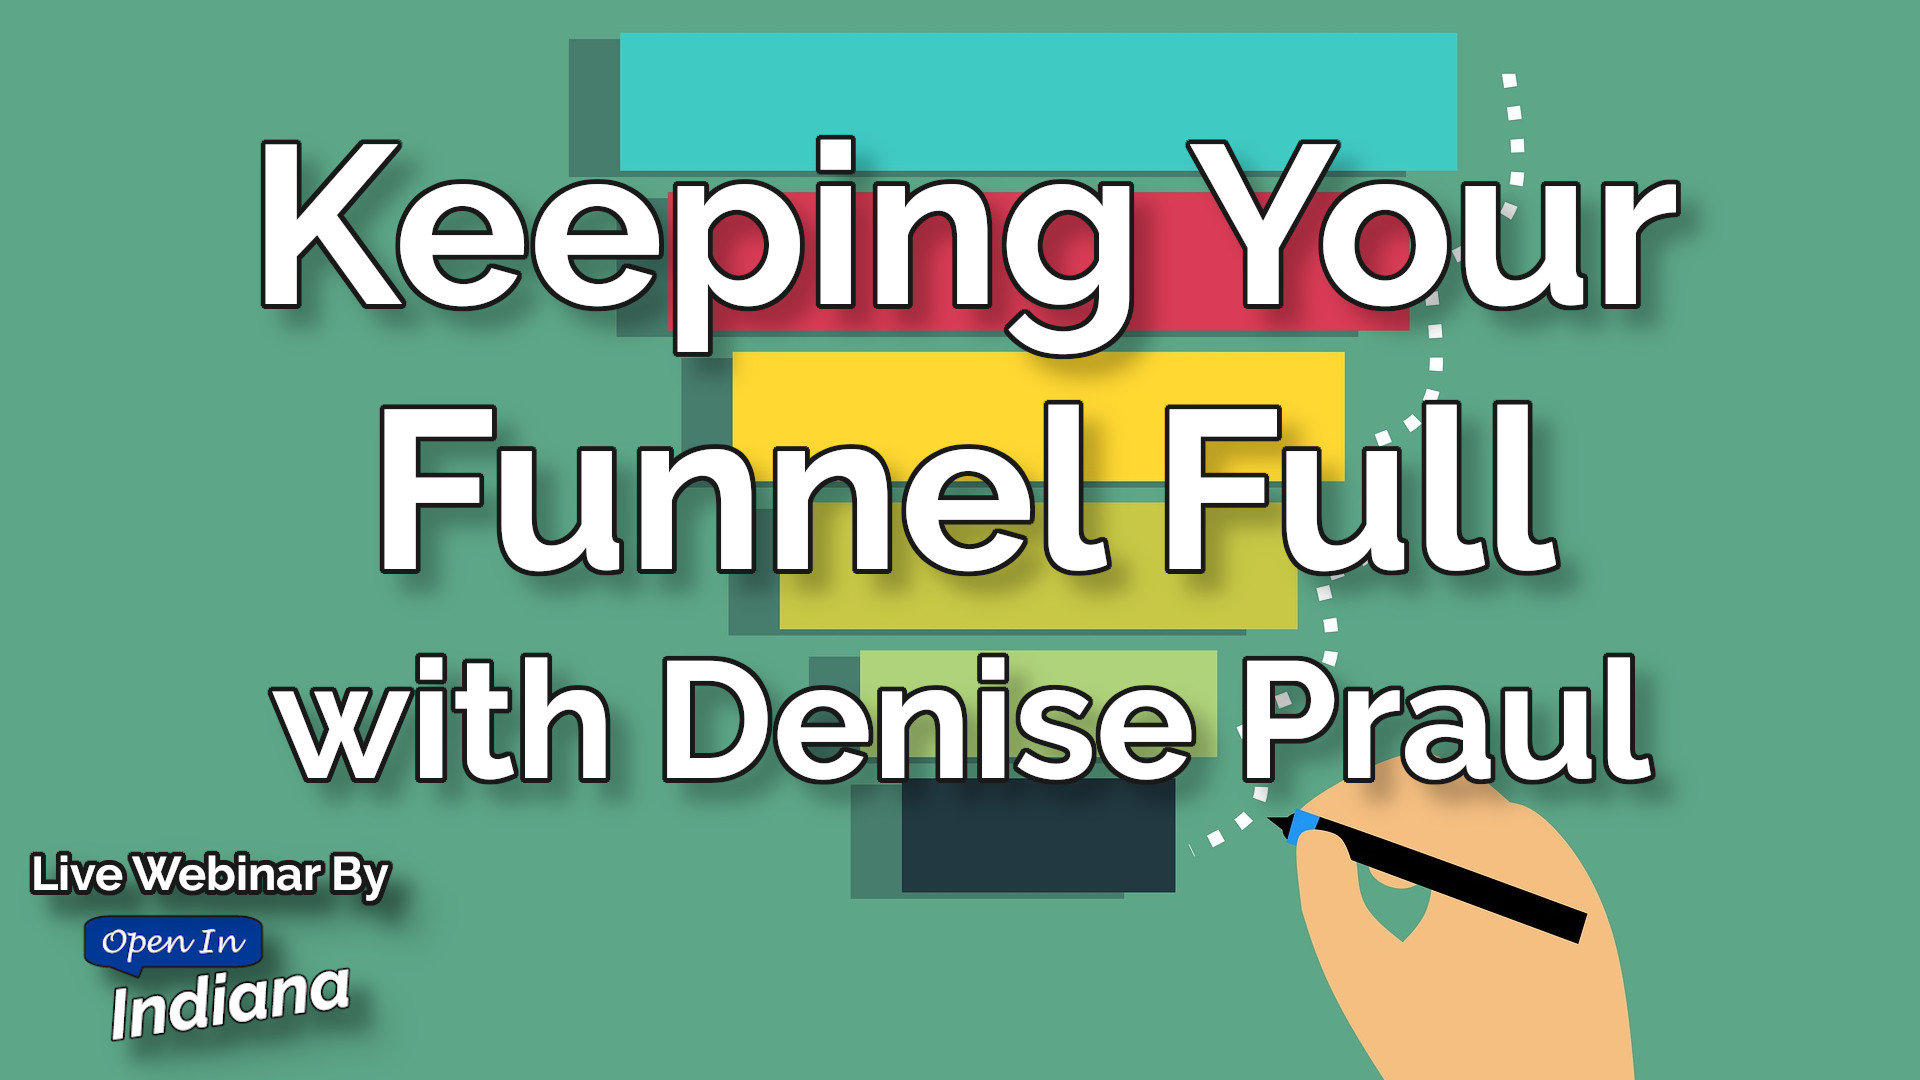 Keeping Your Funnel Full with Denise Praul, Live Webinar by Open In Indiana